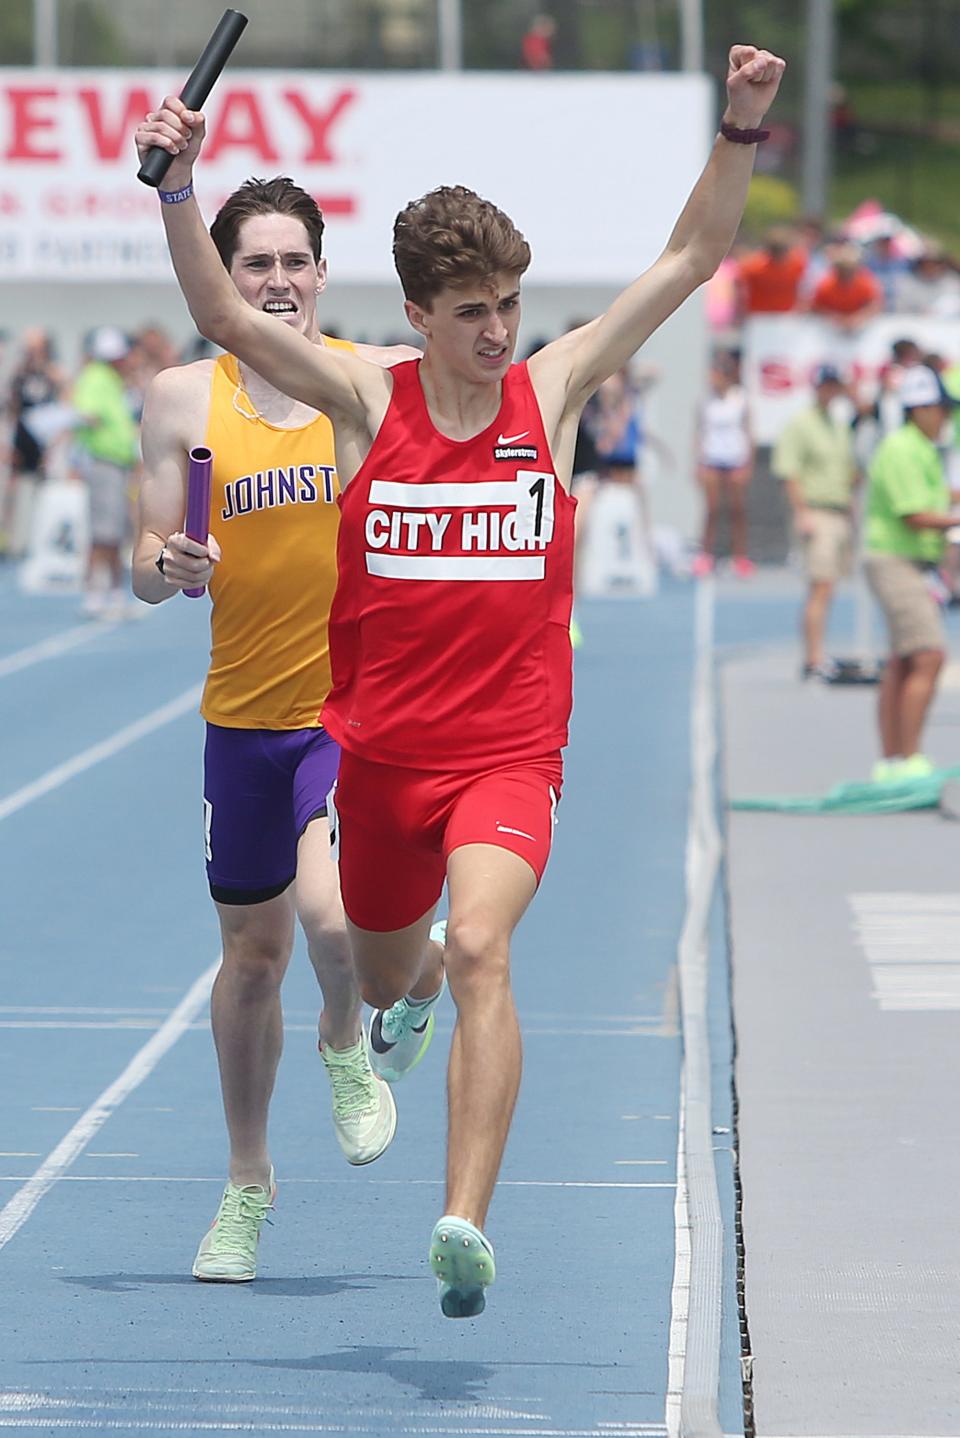 Here's how Iowa Cityarea athletes performed at the Iowa high school state track meet